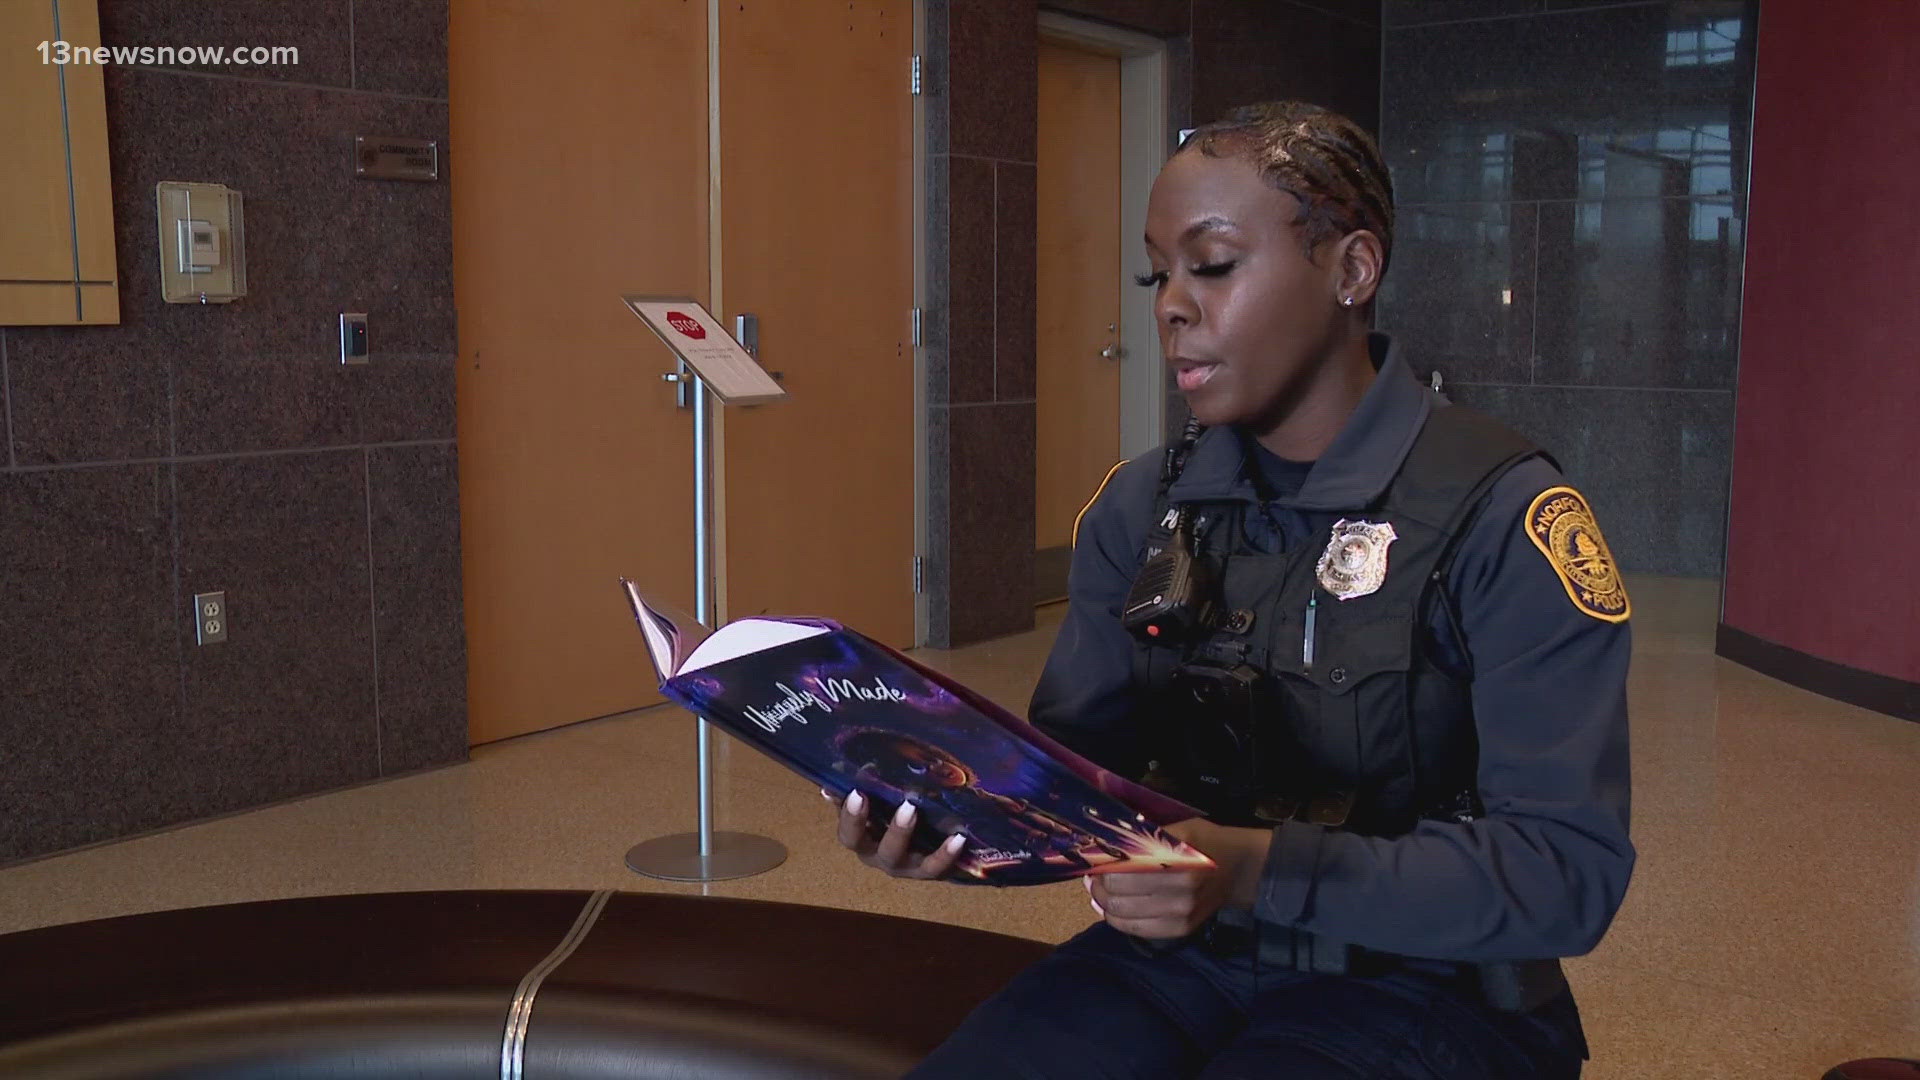 Norfolk Police Officer Shantel Chandler's new book is uplifting children with special needs and their families. The book is dedicated to her late daughter, Ava.